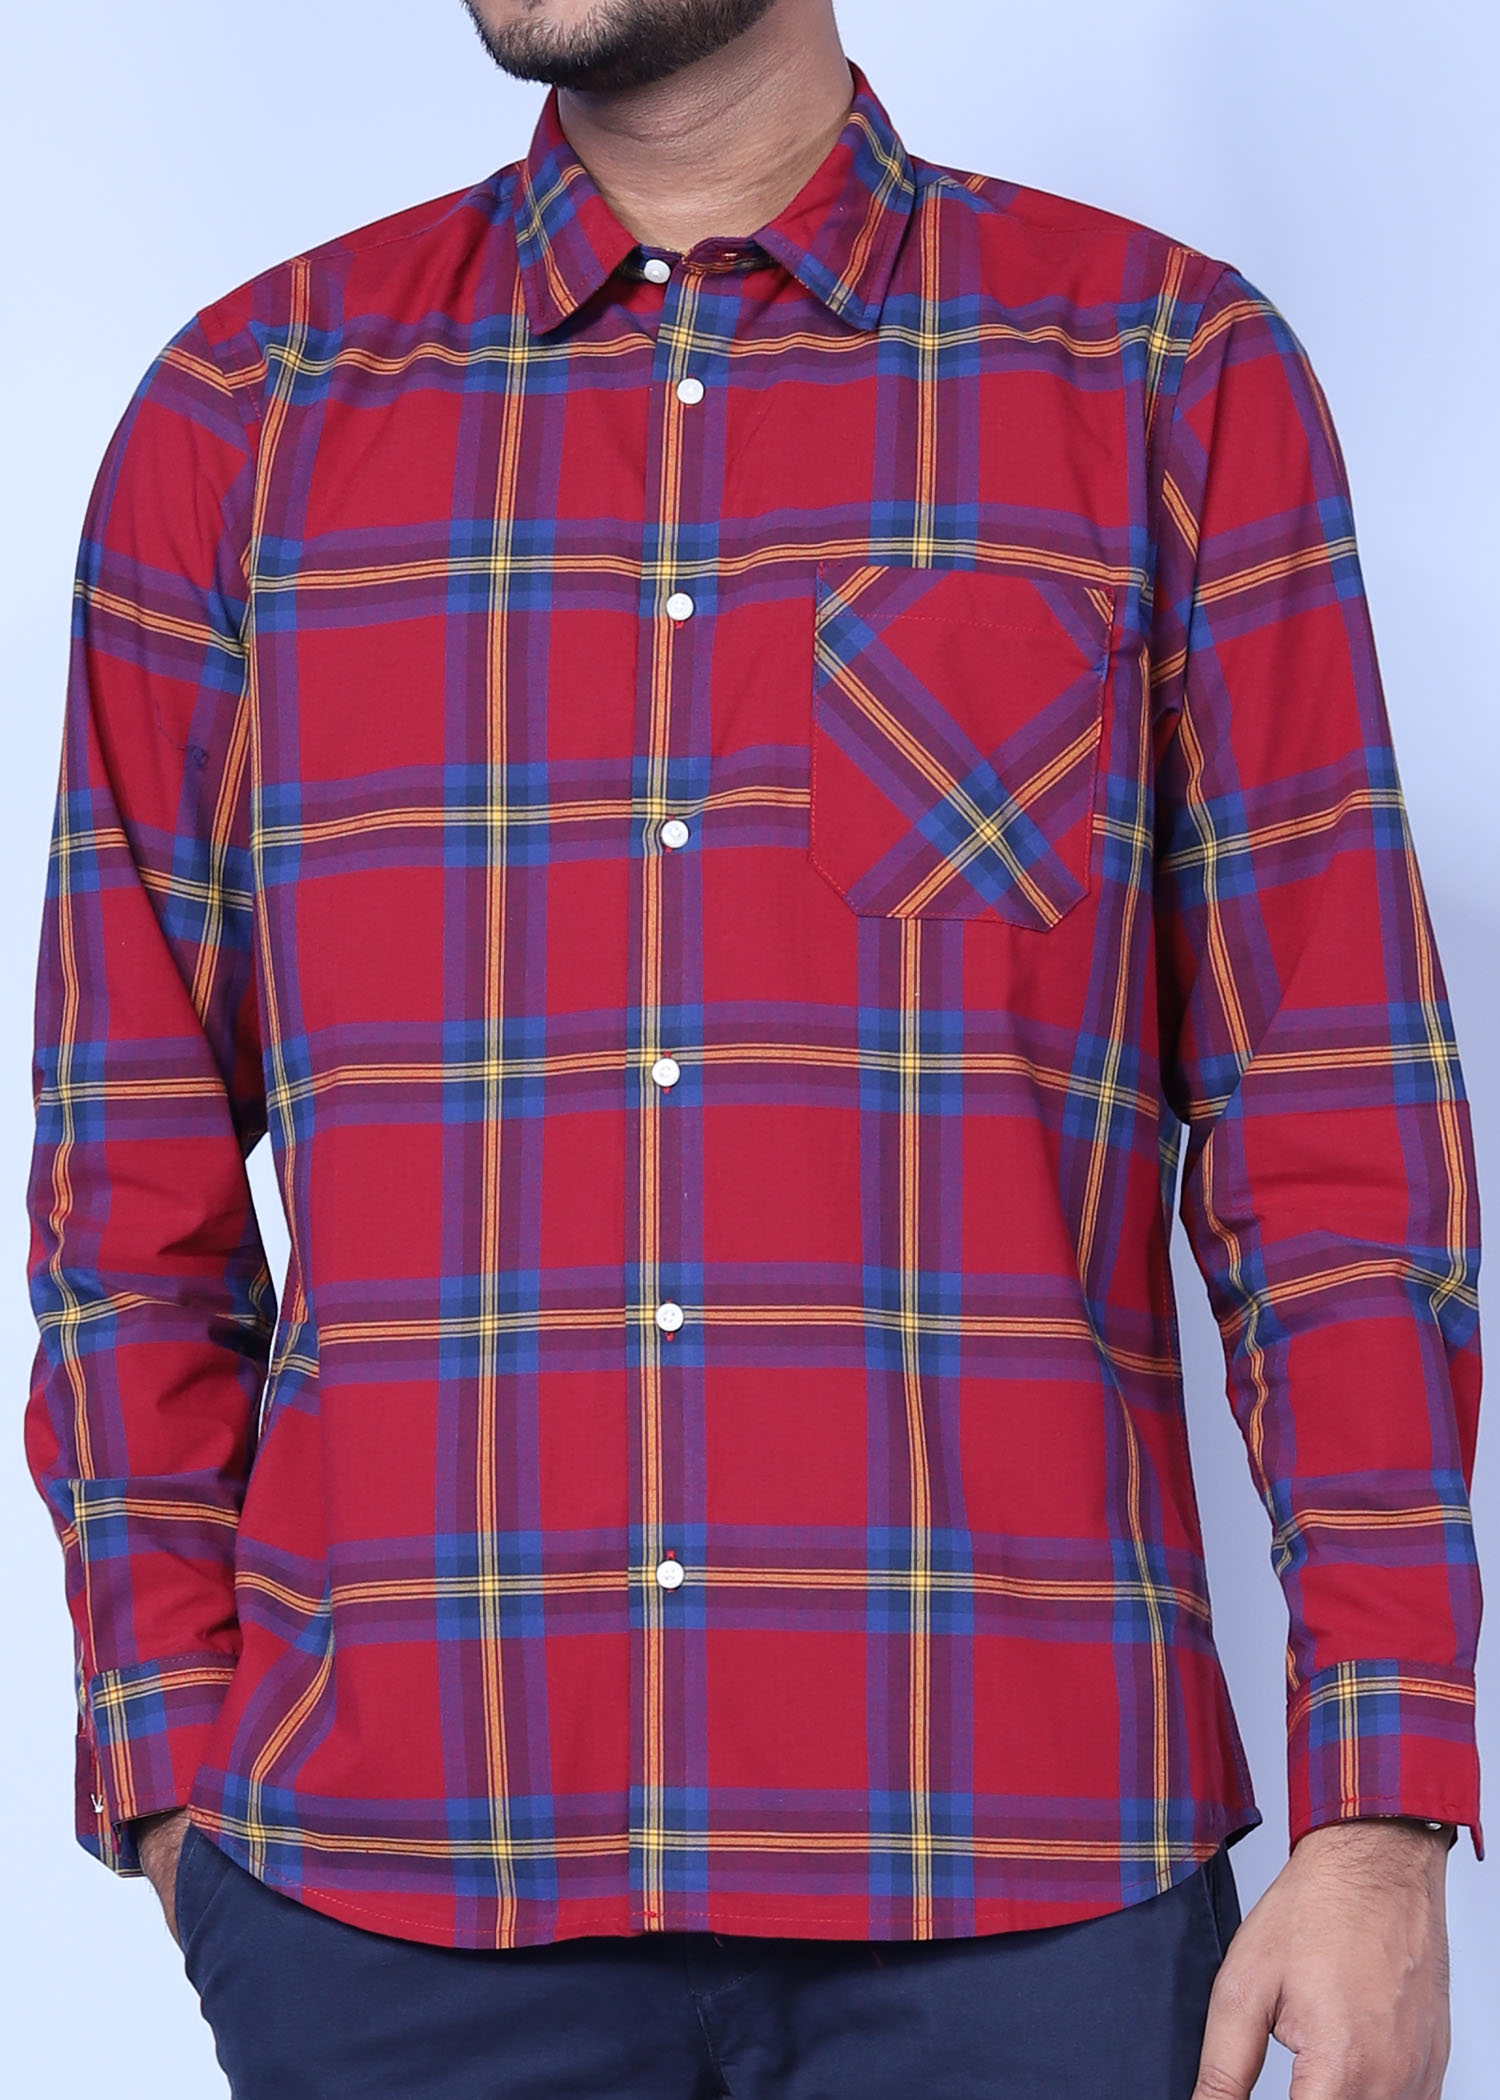 istanbul xxii fs shirt binking red color facecropped